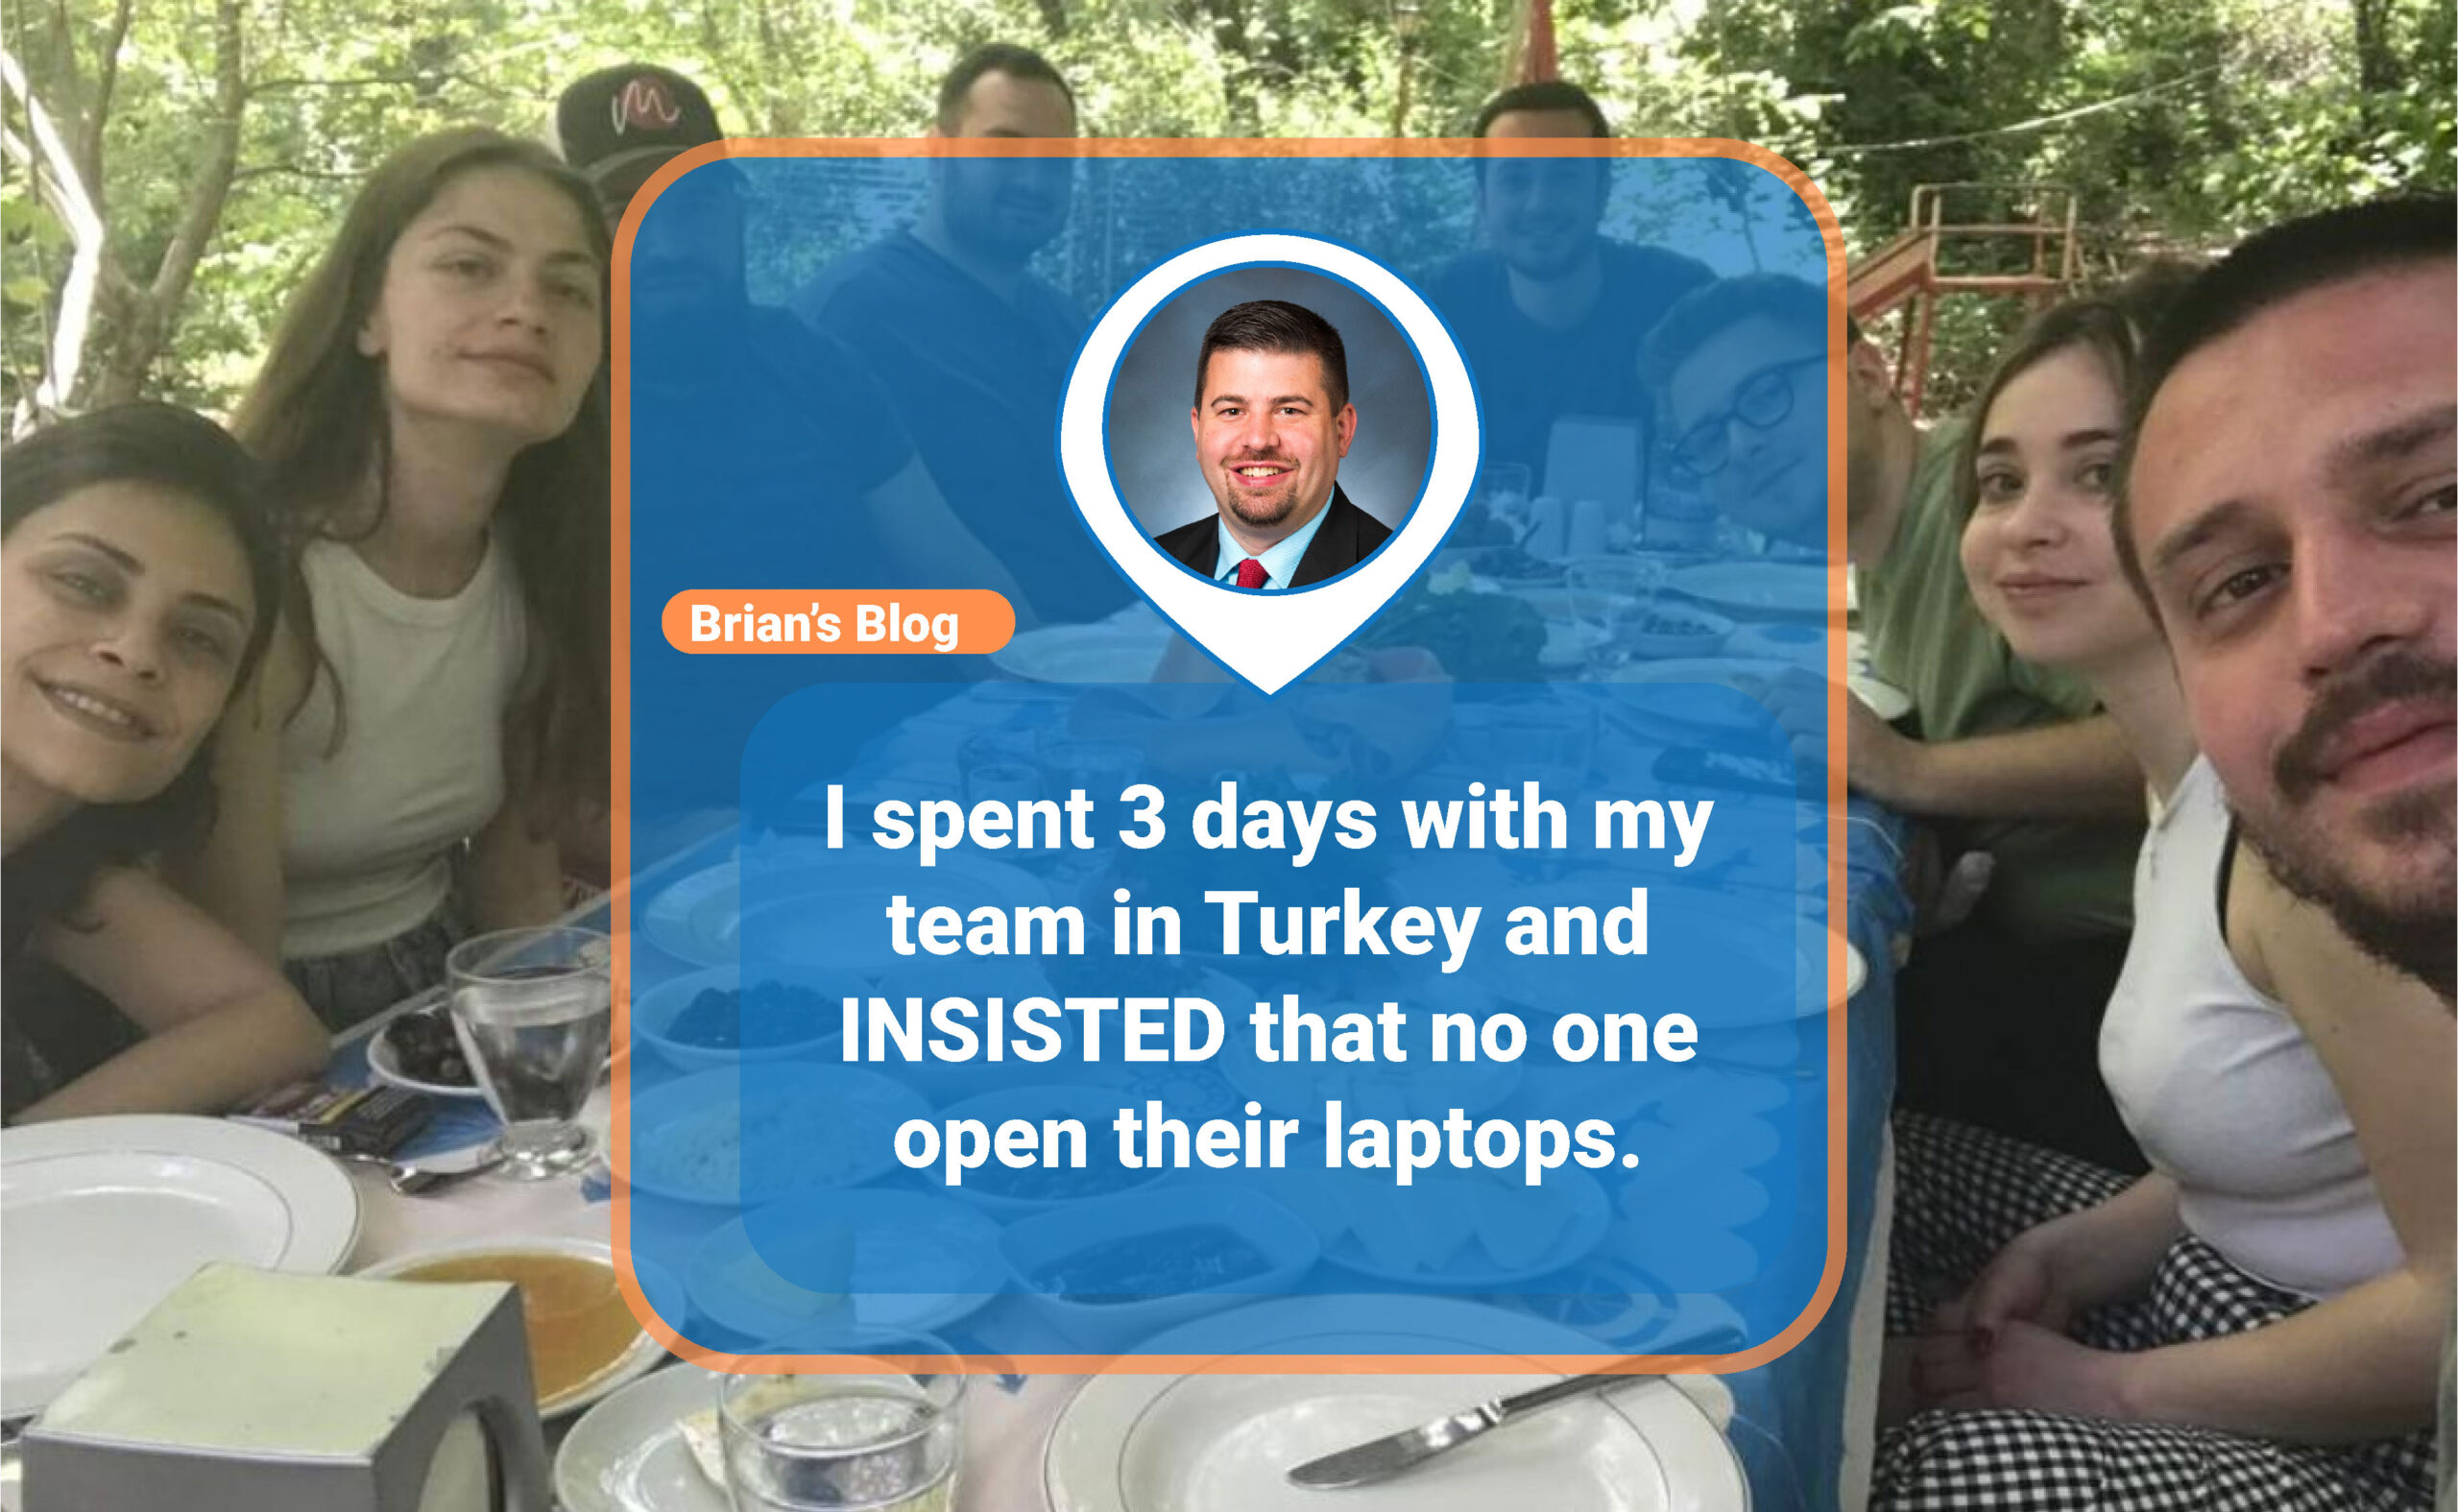 I spent 3 days with my team in Turkey and INSISTED that no one open their laptops.